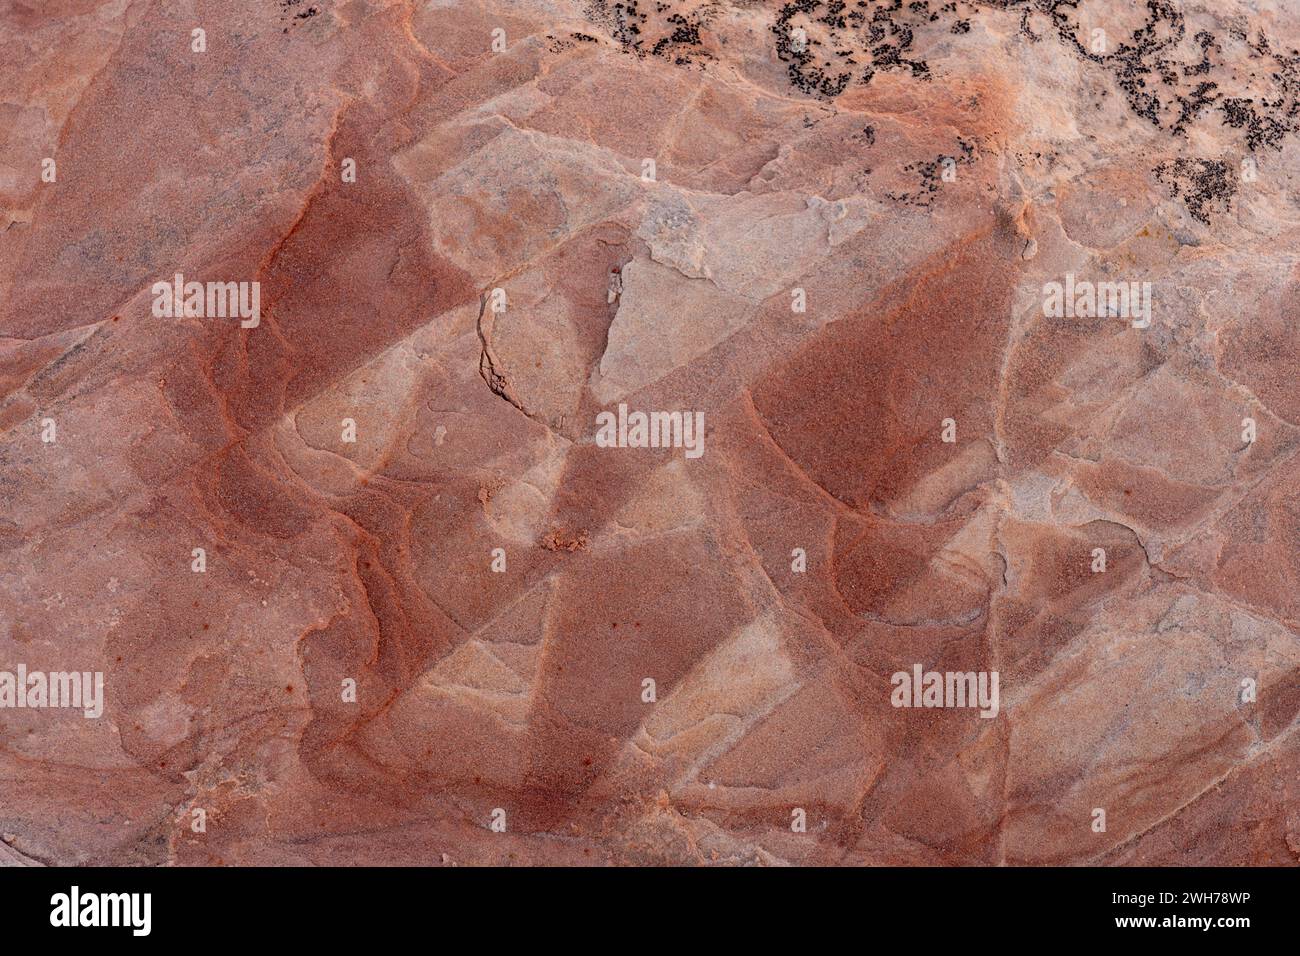 Eroded Navajo sandstone formations in the White Pocket Recreation Area, Vermilion Cliffs National Monument, Arizona.  Small laterally displaced faults Stock Photo